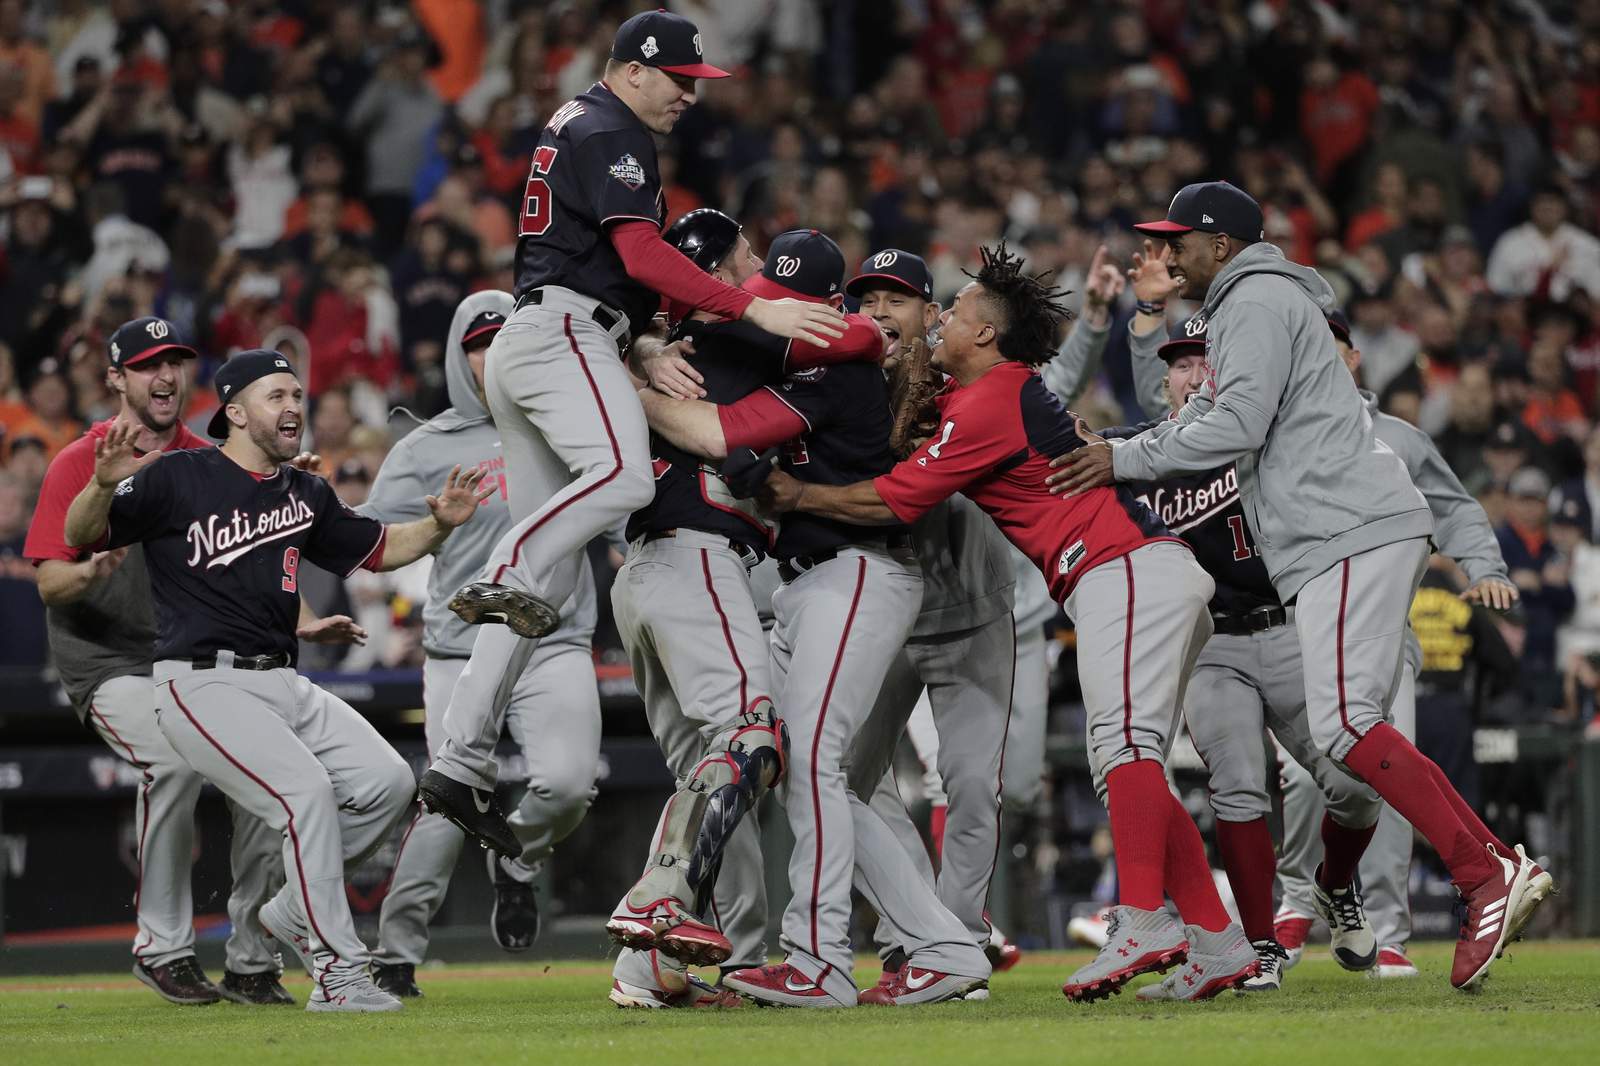 Champs done: Time to look toward 2021 for eliminated Nats